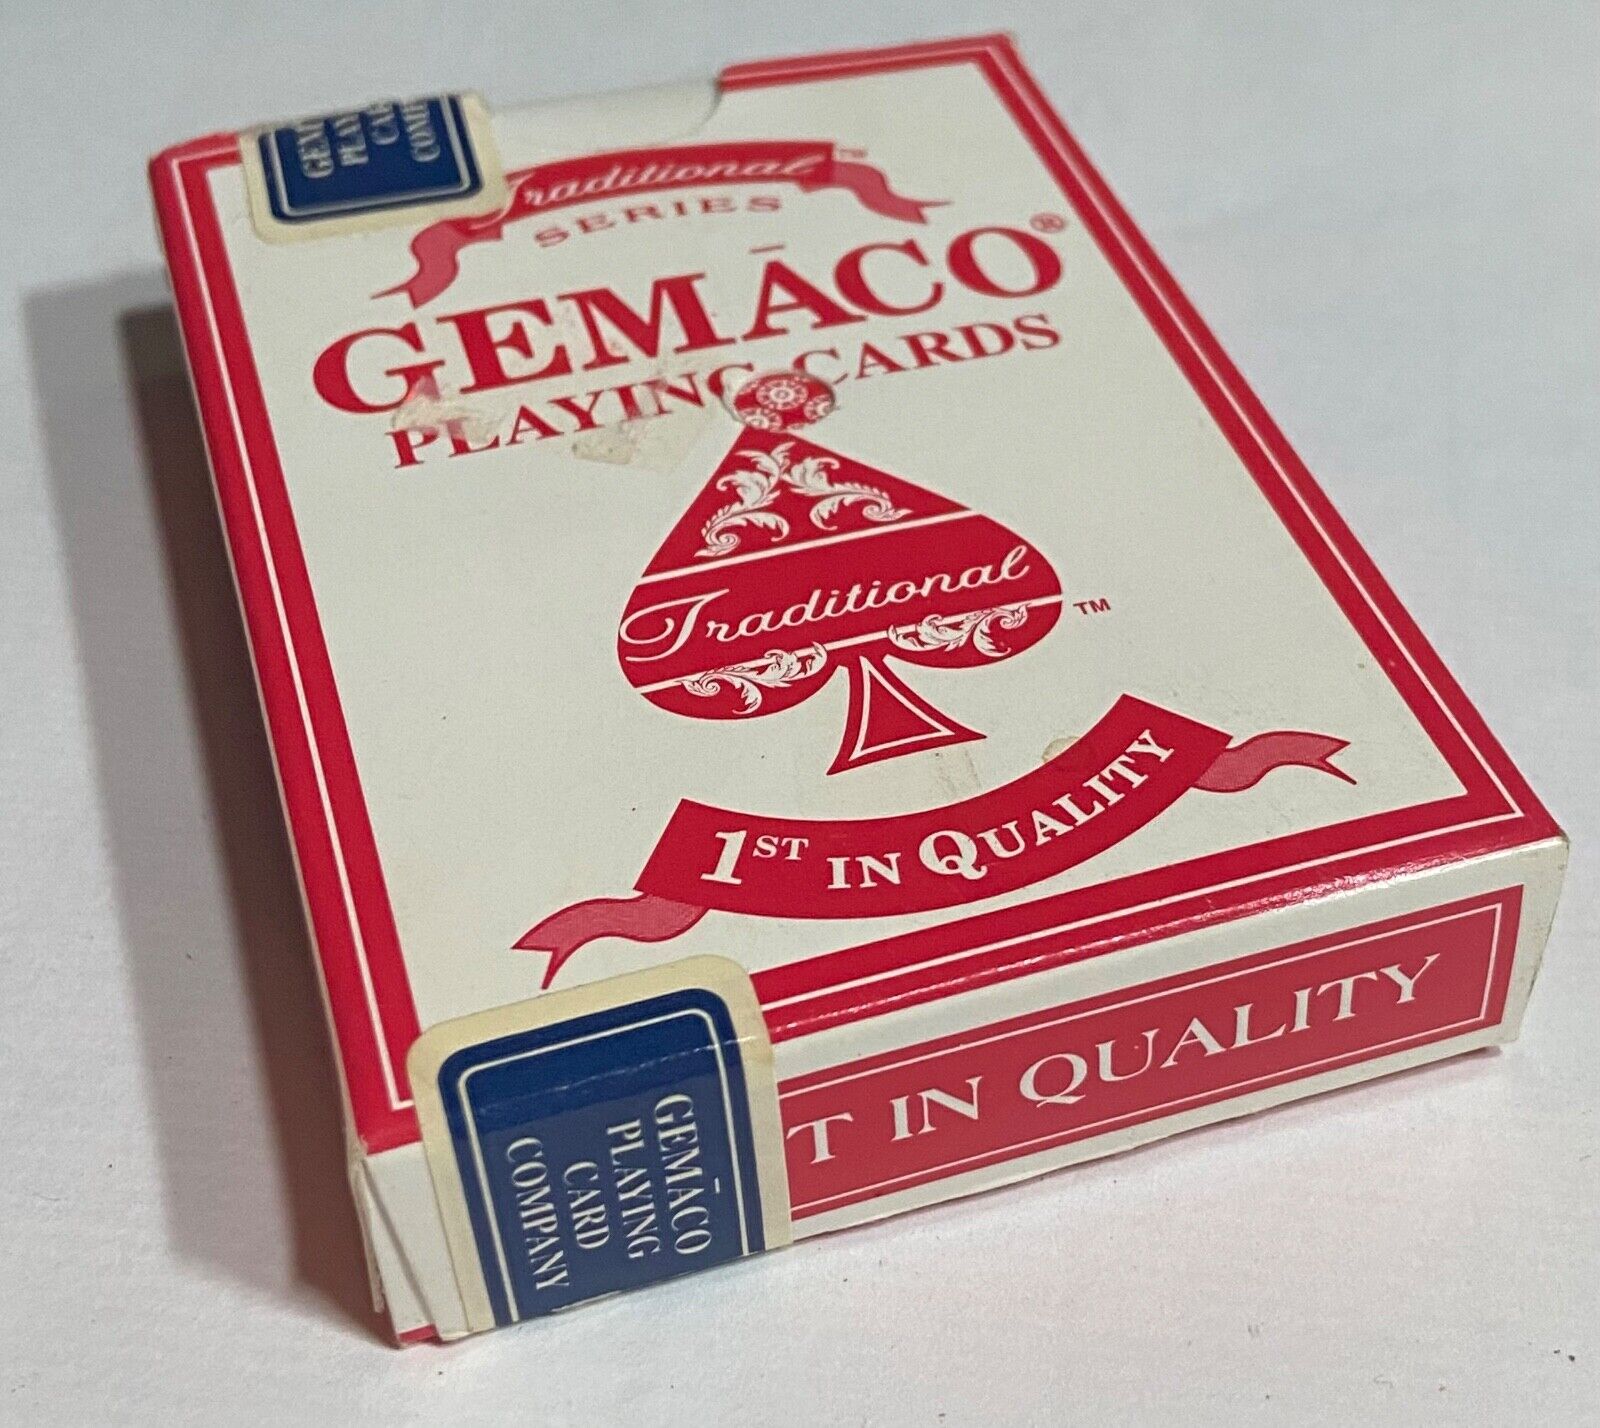 Traditional Series GEMACO Playing Cards Trump Plaza Tech Art II Faces Full Deck